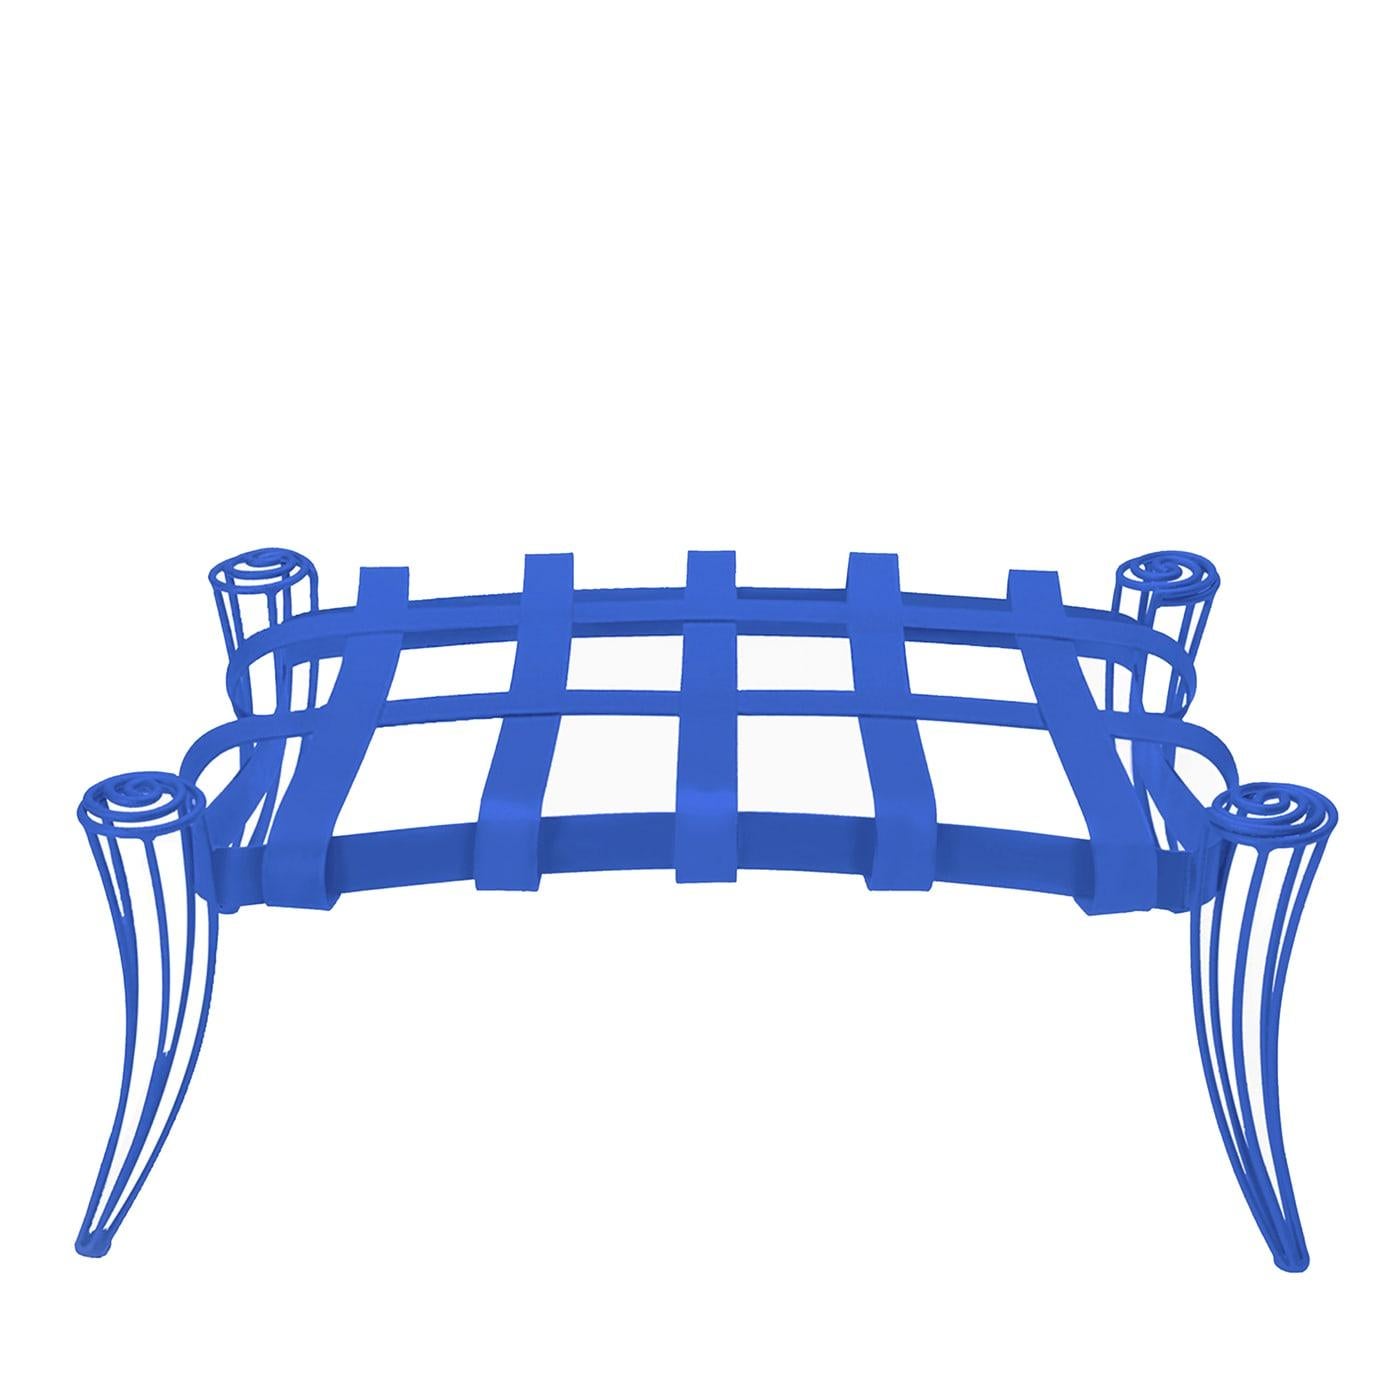 Lacquered in a vibrant shade of blue and treated to be rust-resistant, this artful pouf was designed by Carlo Rampazzi to safely complement gardens, patios, or terraces while not renouncing glamour. The iron frame is minutely hand-bended up to